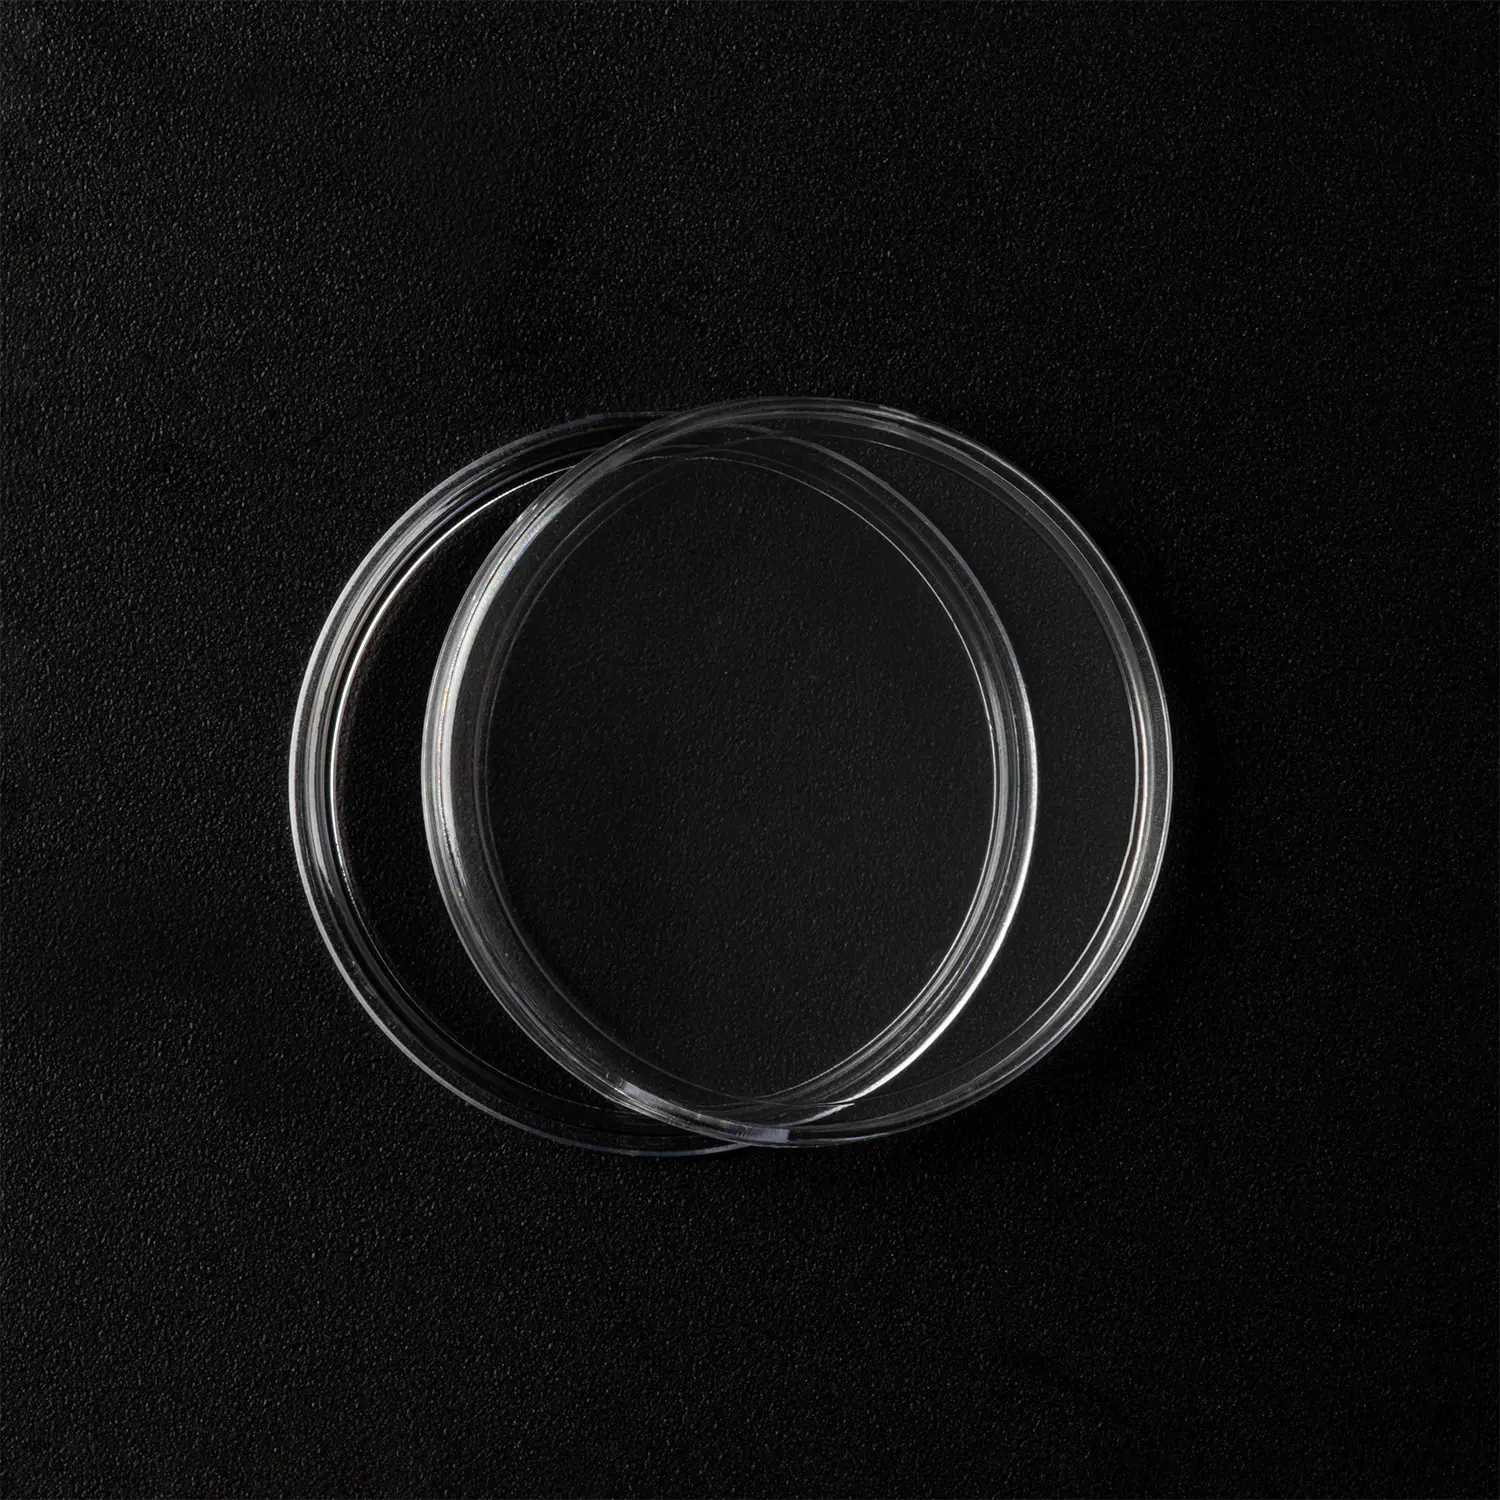 Holder Round Plastic Coin Container Case 100Pcs/Lot 20/25/27/30mm